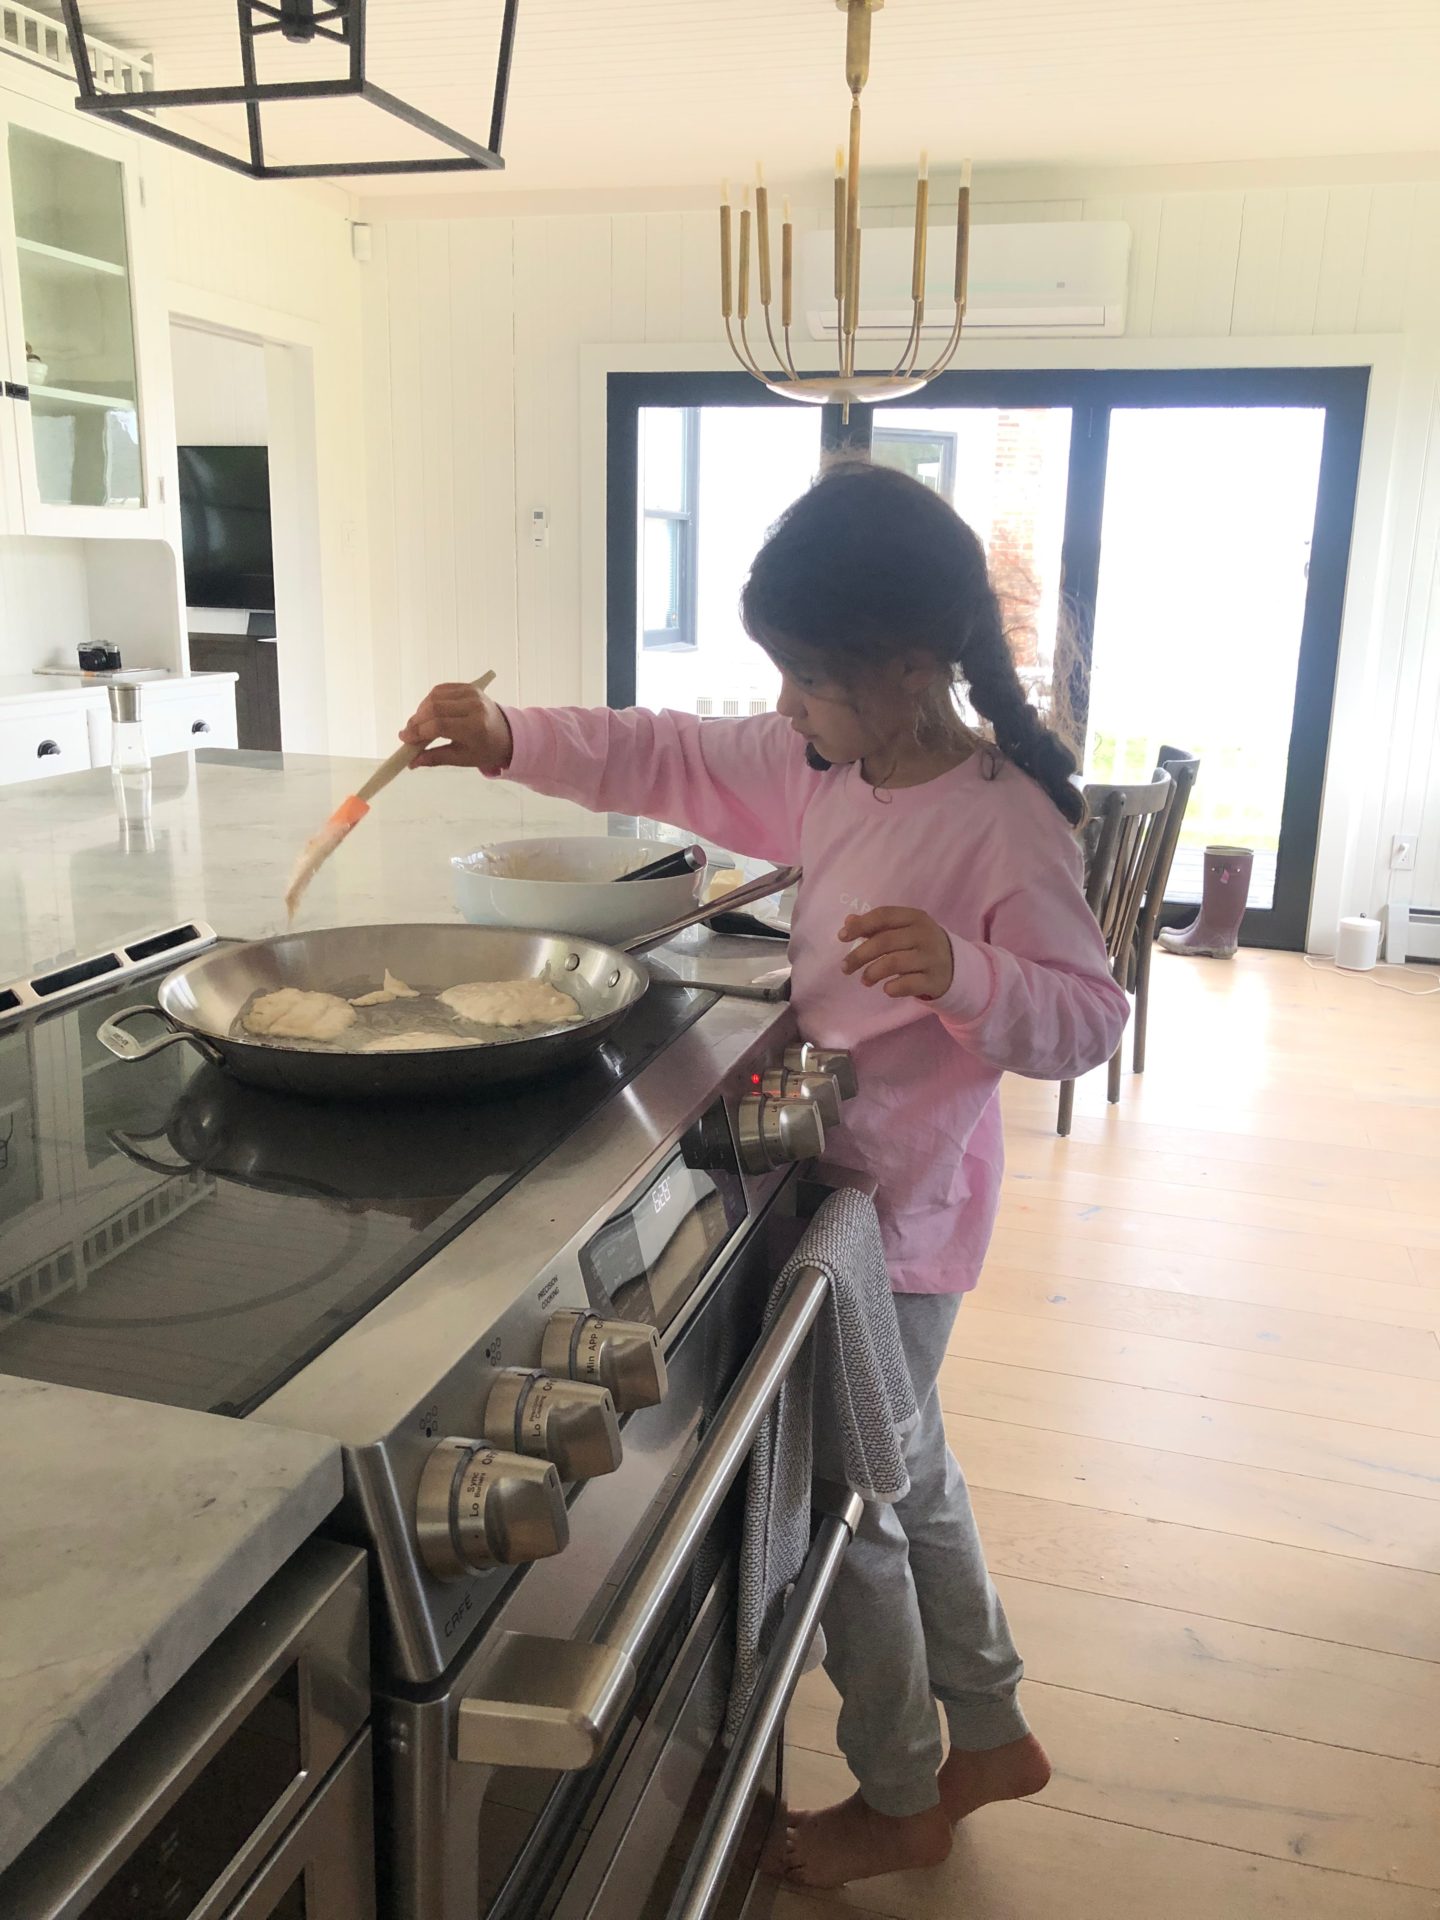 Philadelphia Lifestyle Blogger Chocolate and Lace shares her family vacation to a renovated Farm House in Southern New Jersey. 